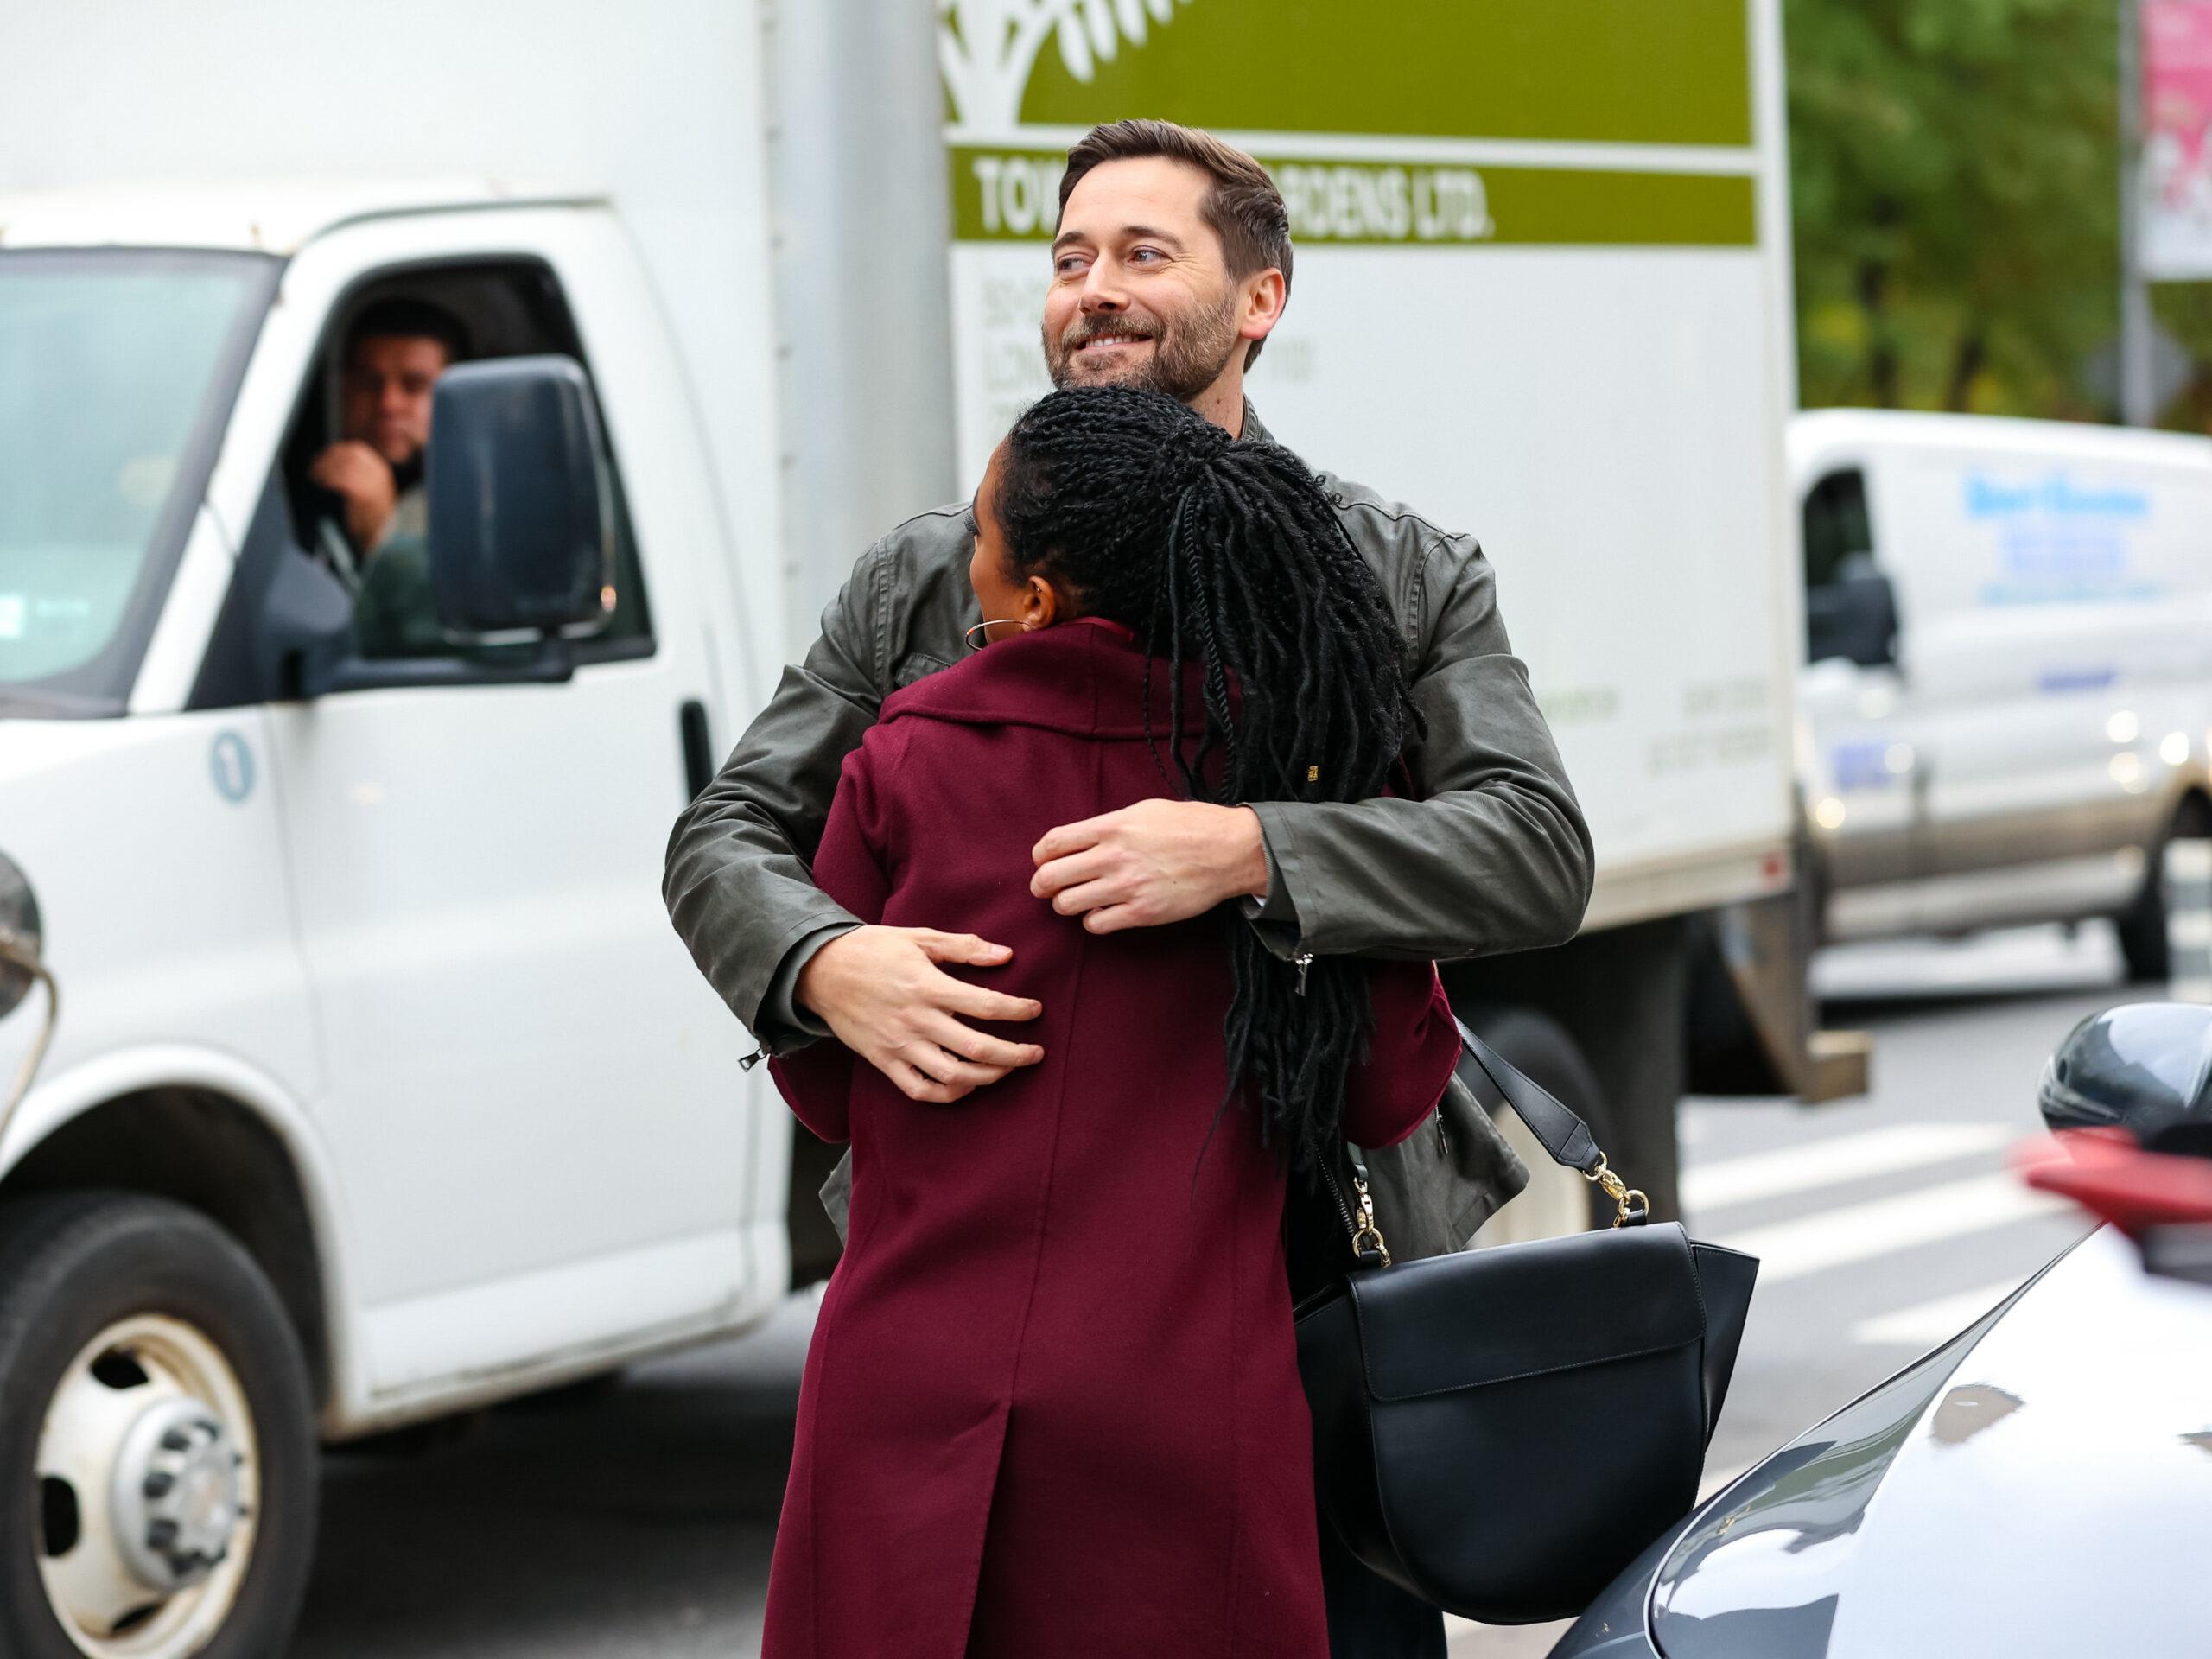 Ryan Eggold is seen on the film set of the 'New Amsterdam' TV Series in New York City.